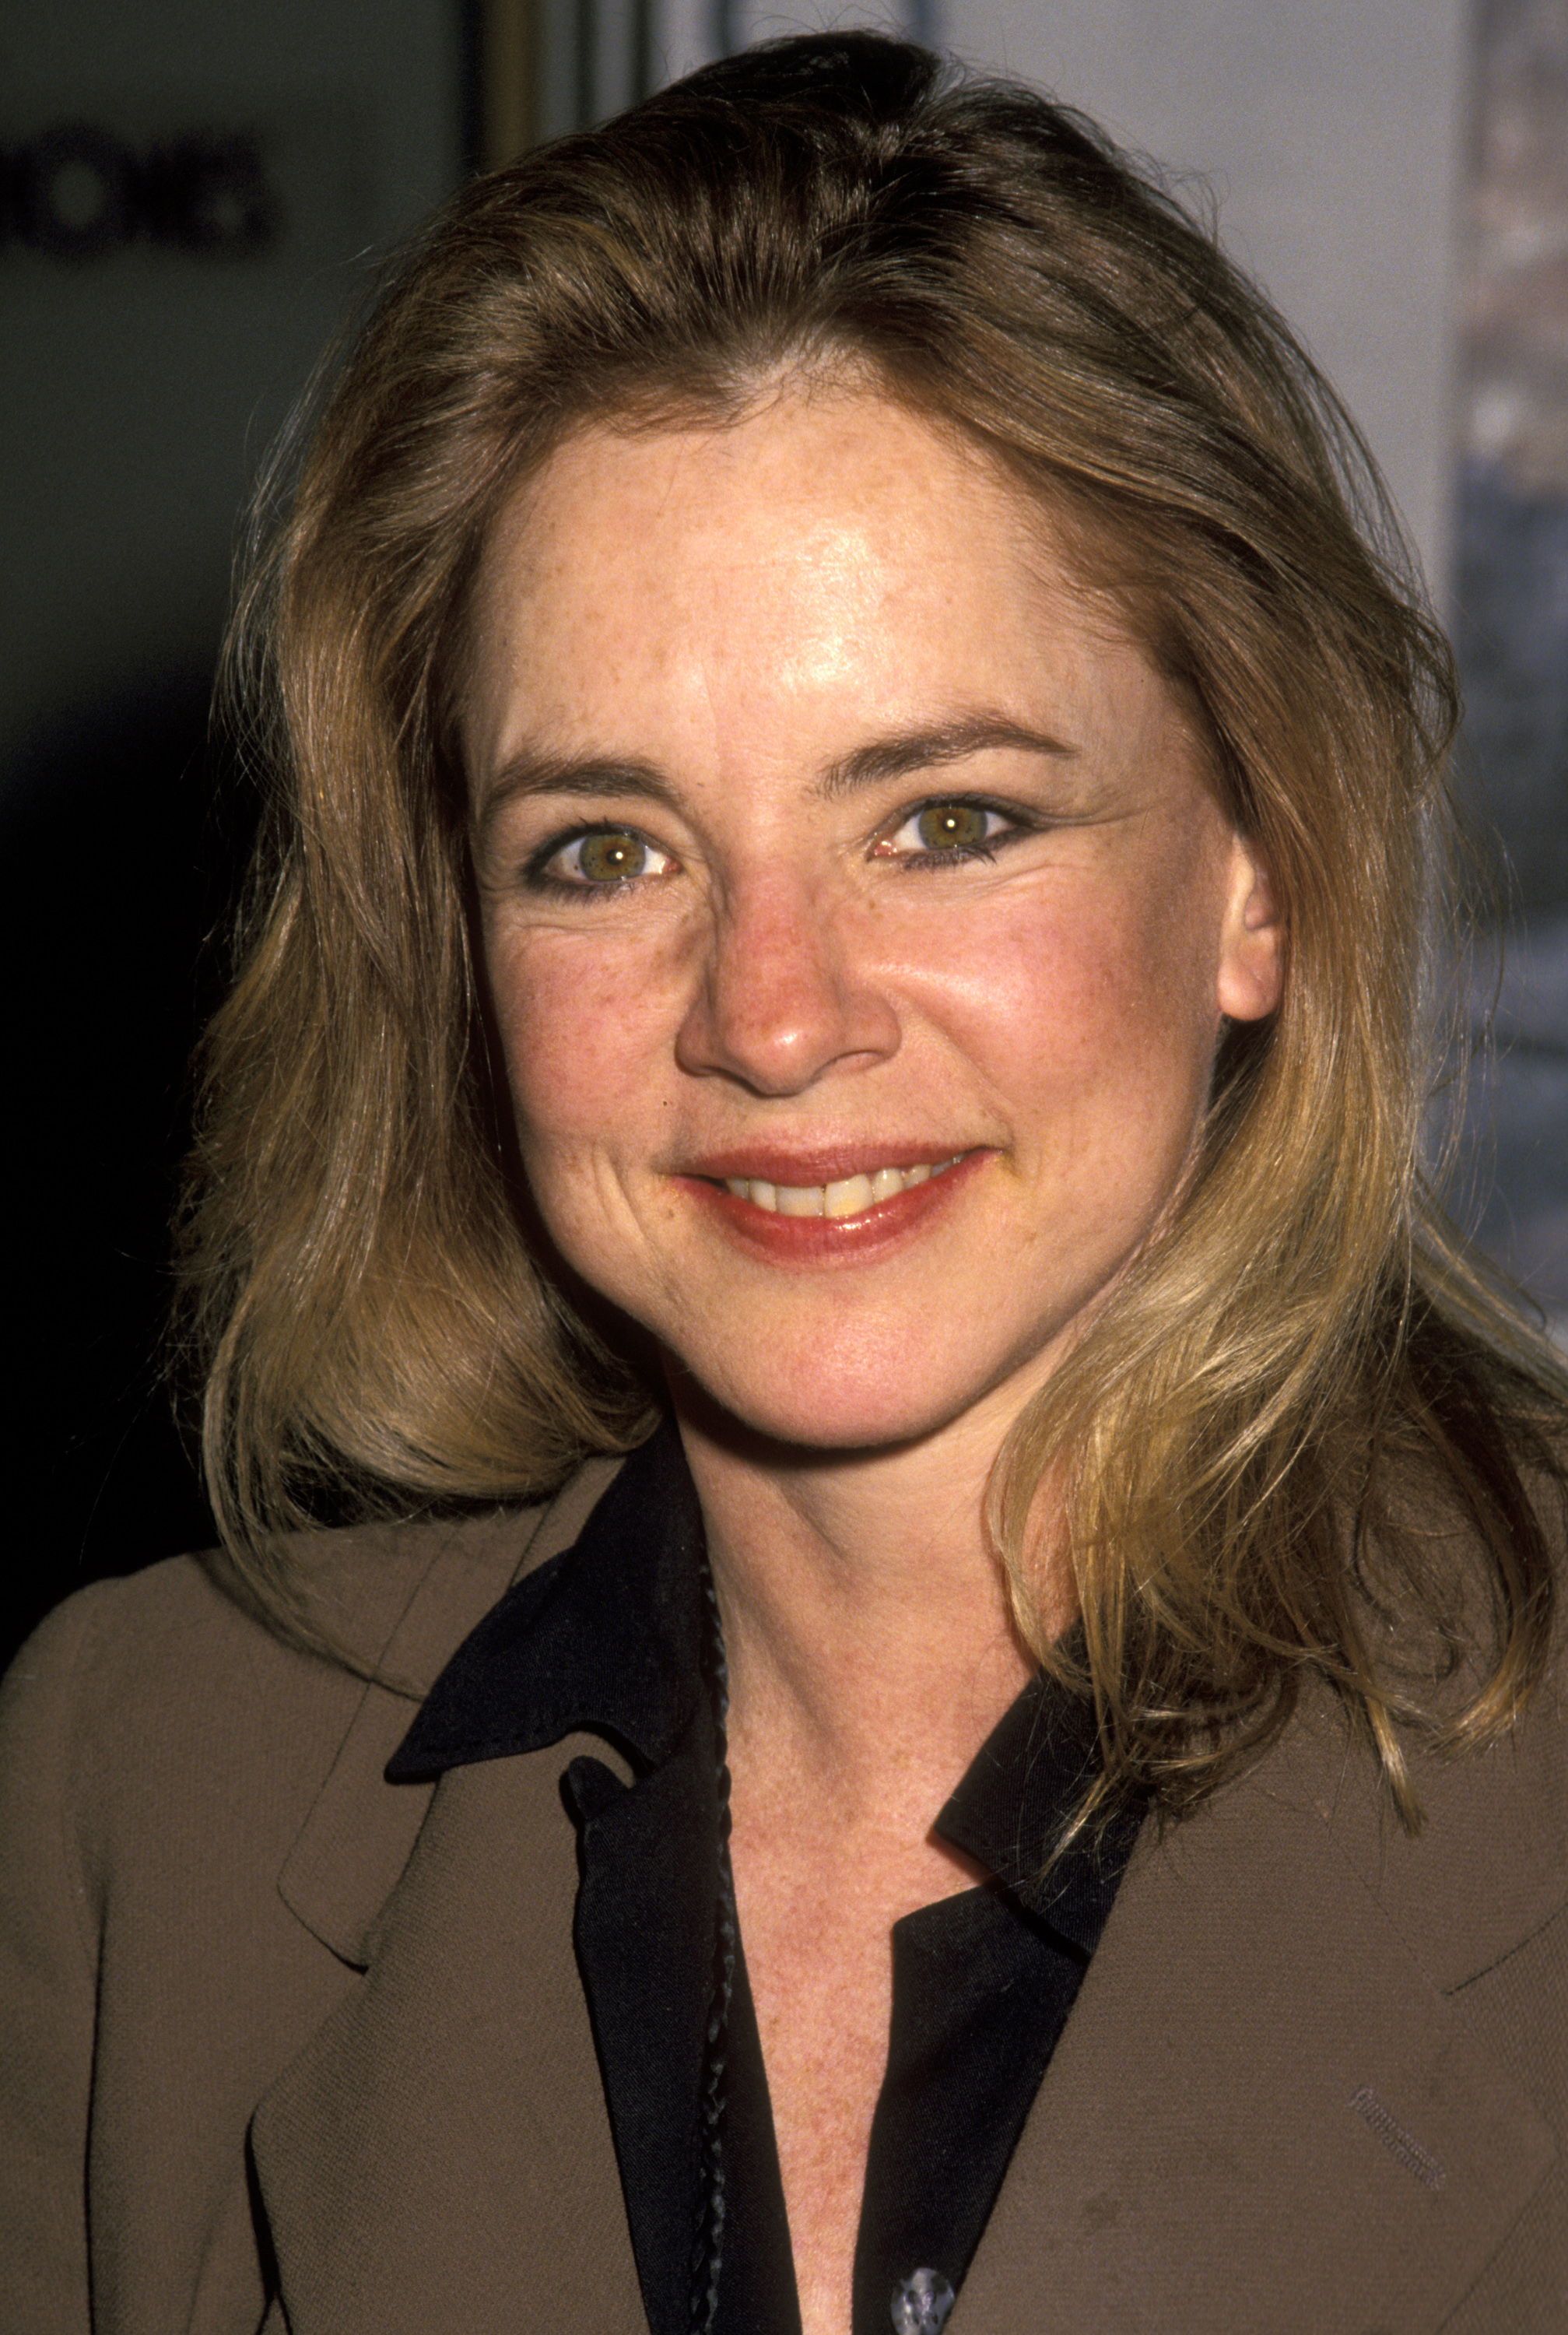 Stockard Channing during "The Normal Heart" Benefit Book Reading at Criterion Center on April 16, 1993 in New York City. | Source: Getty Images